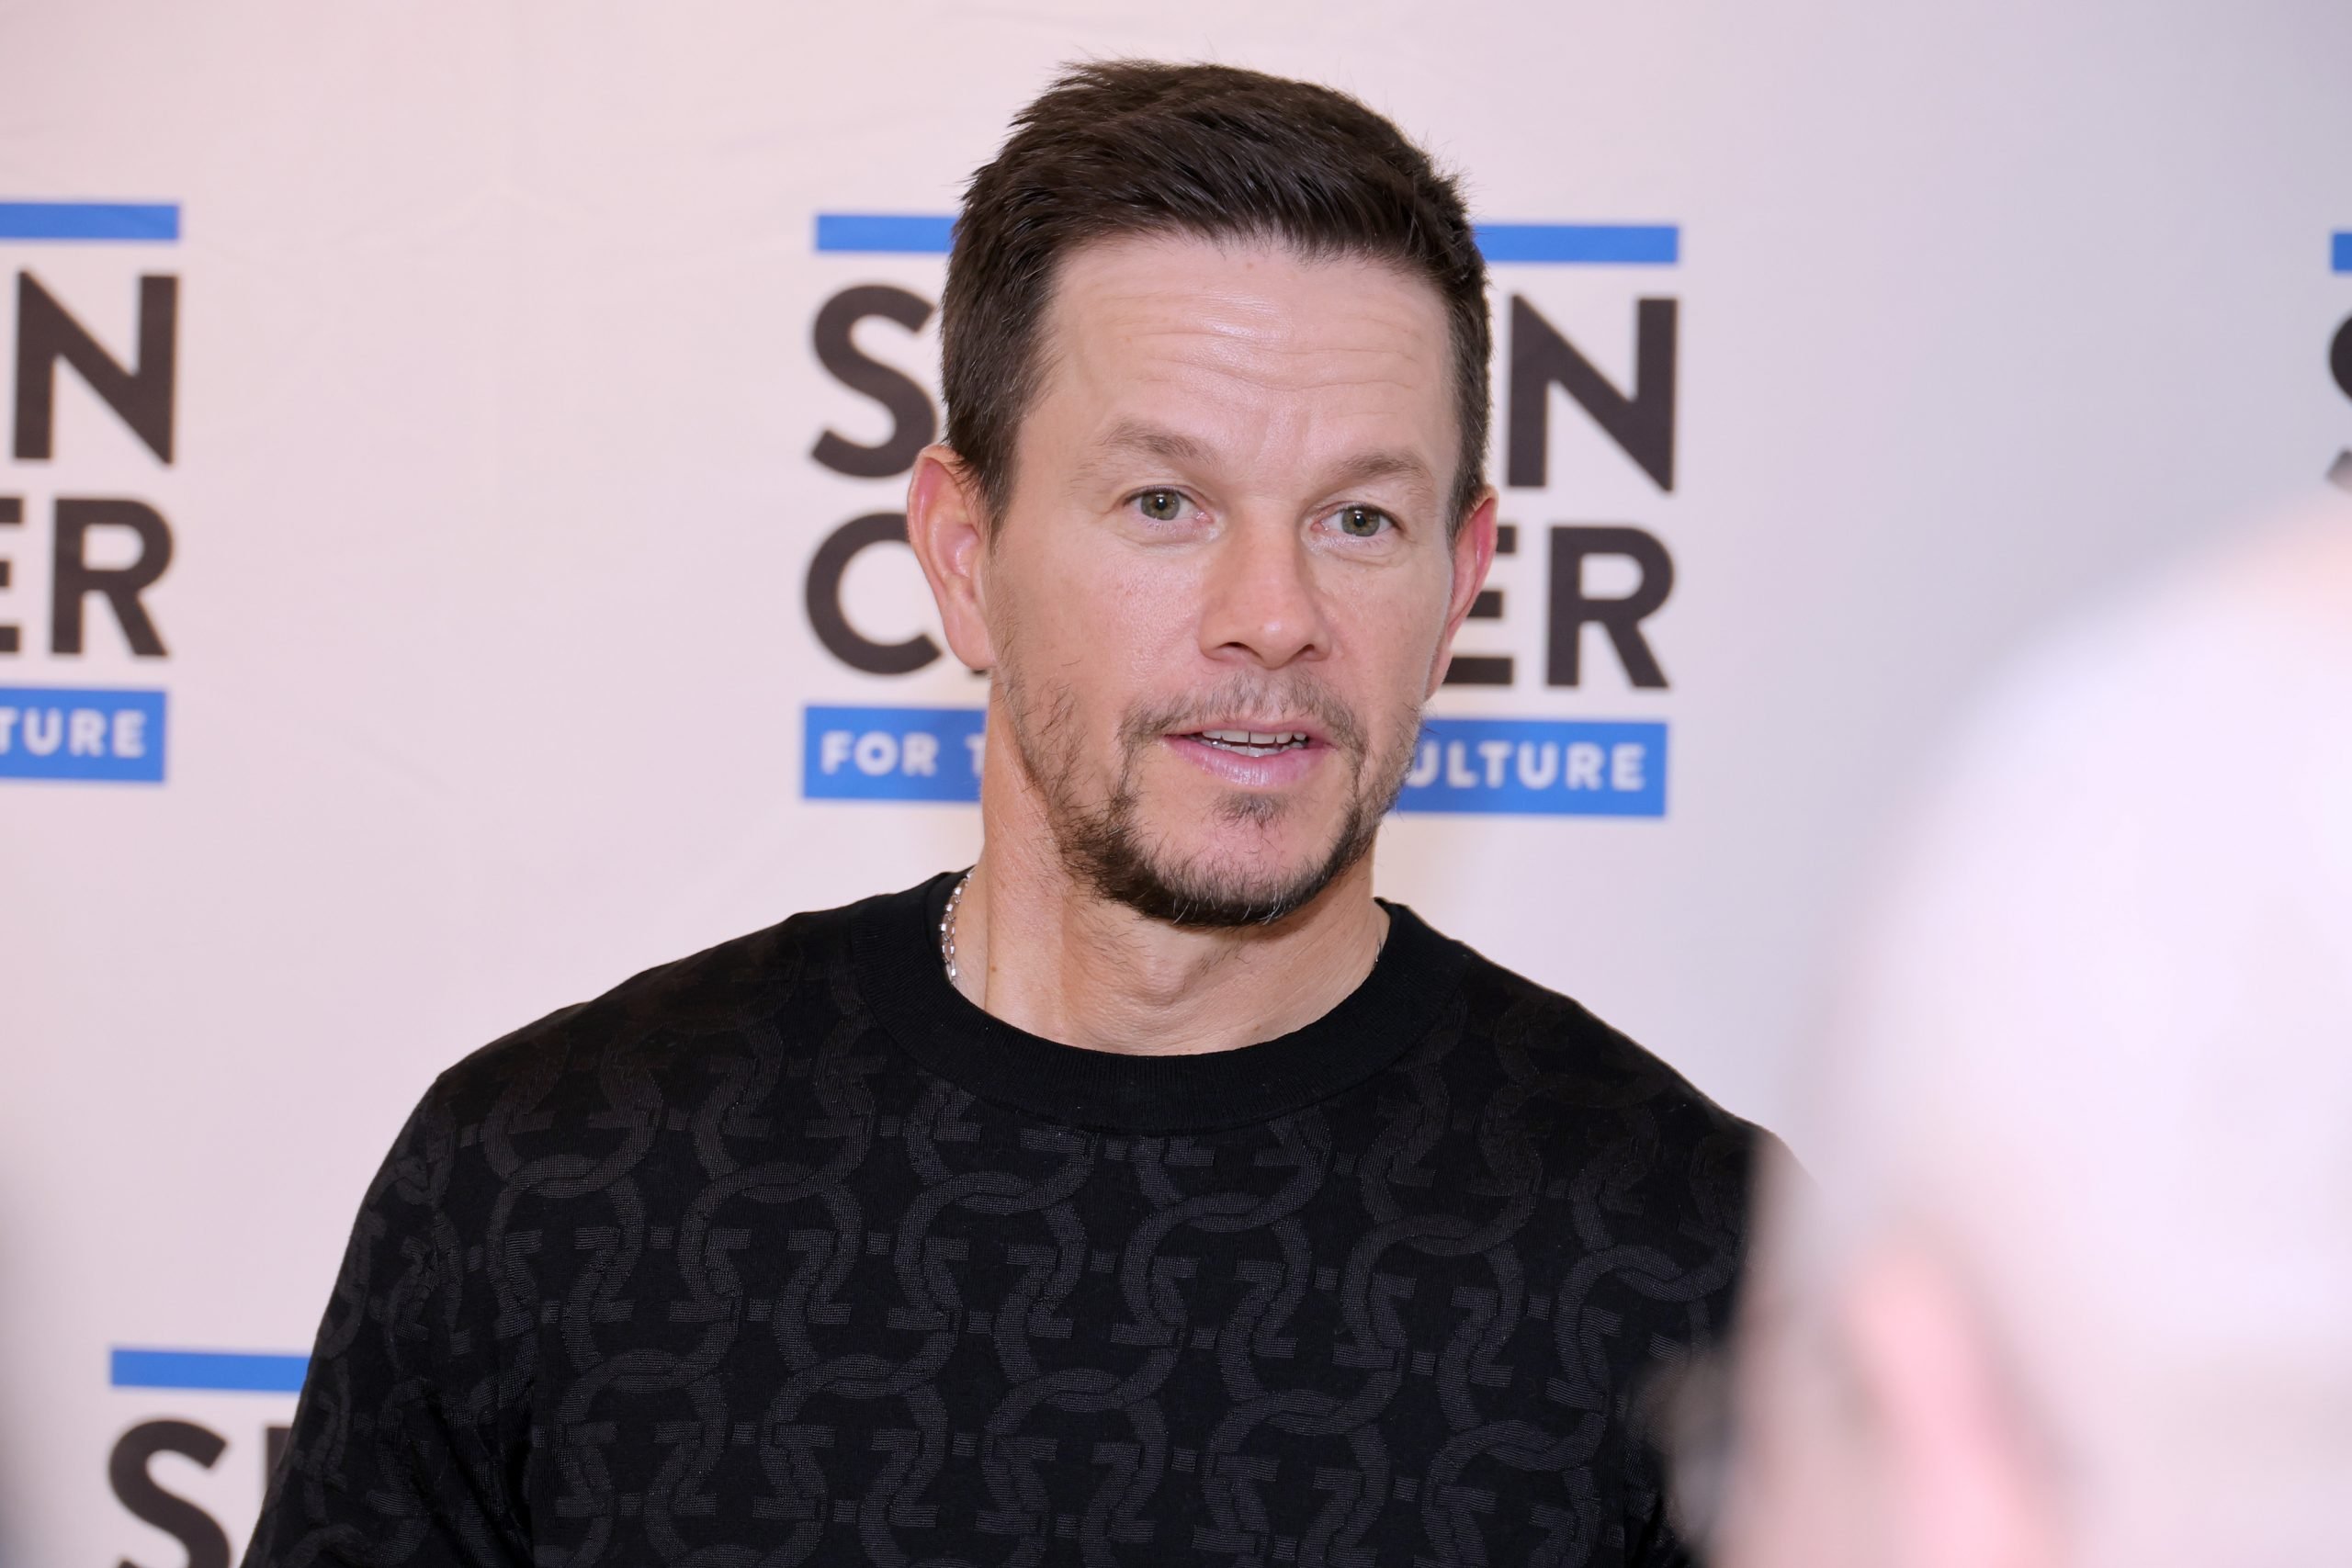 Mark Wahlberg attends a NY special screening for his movie, Father Stu